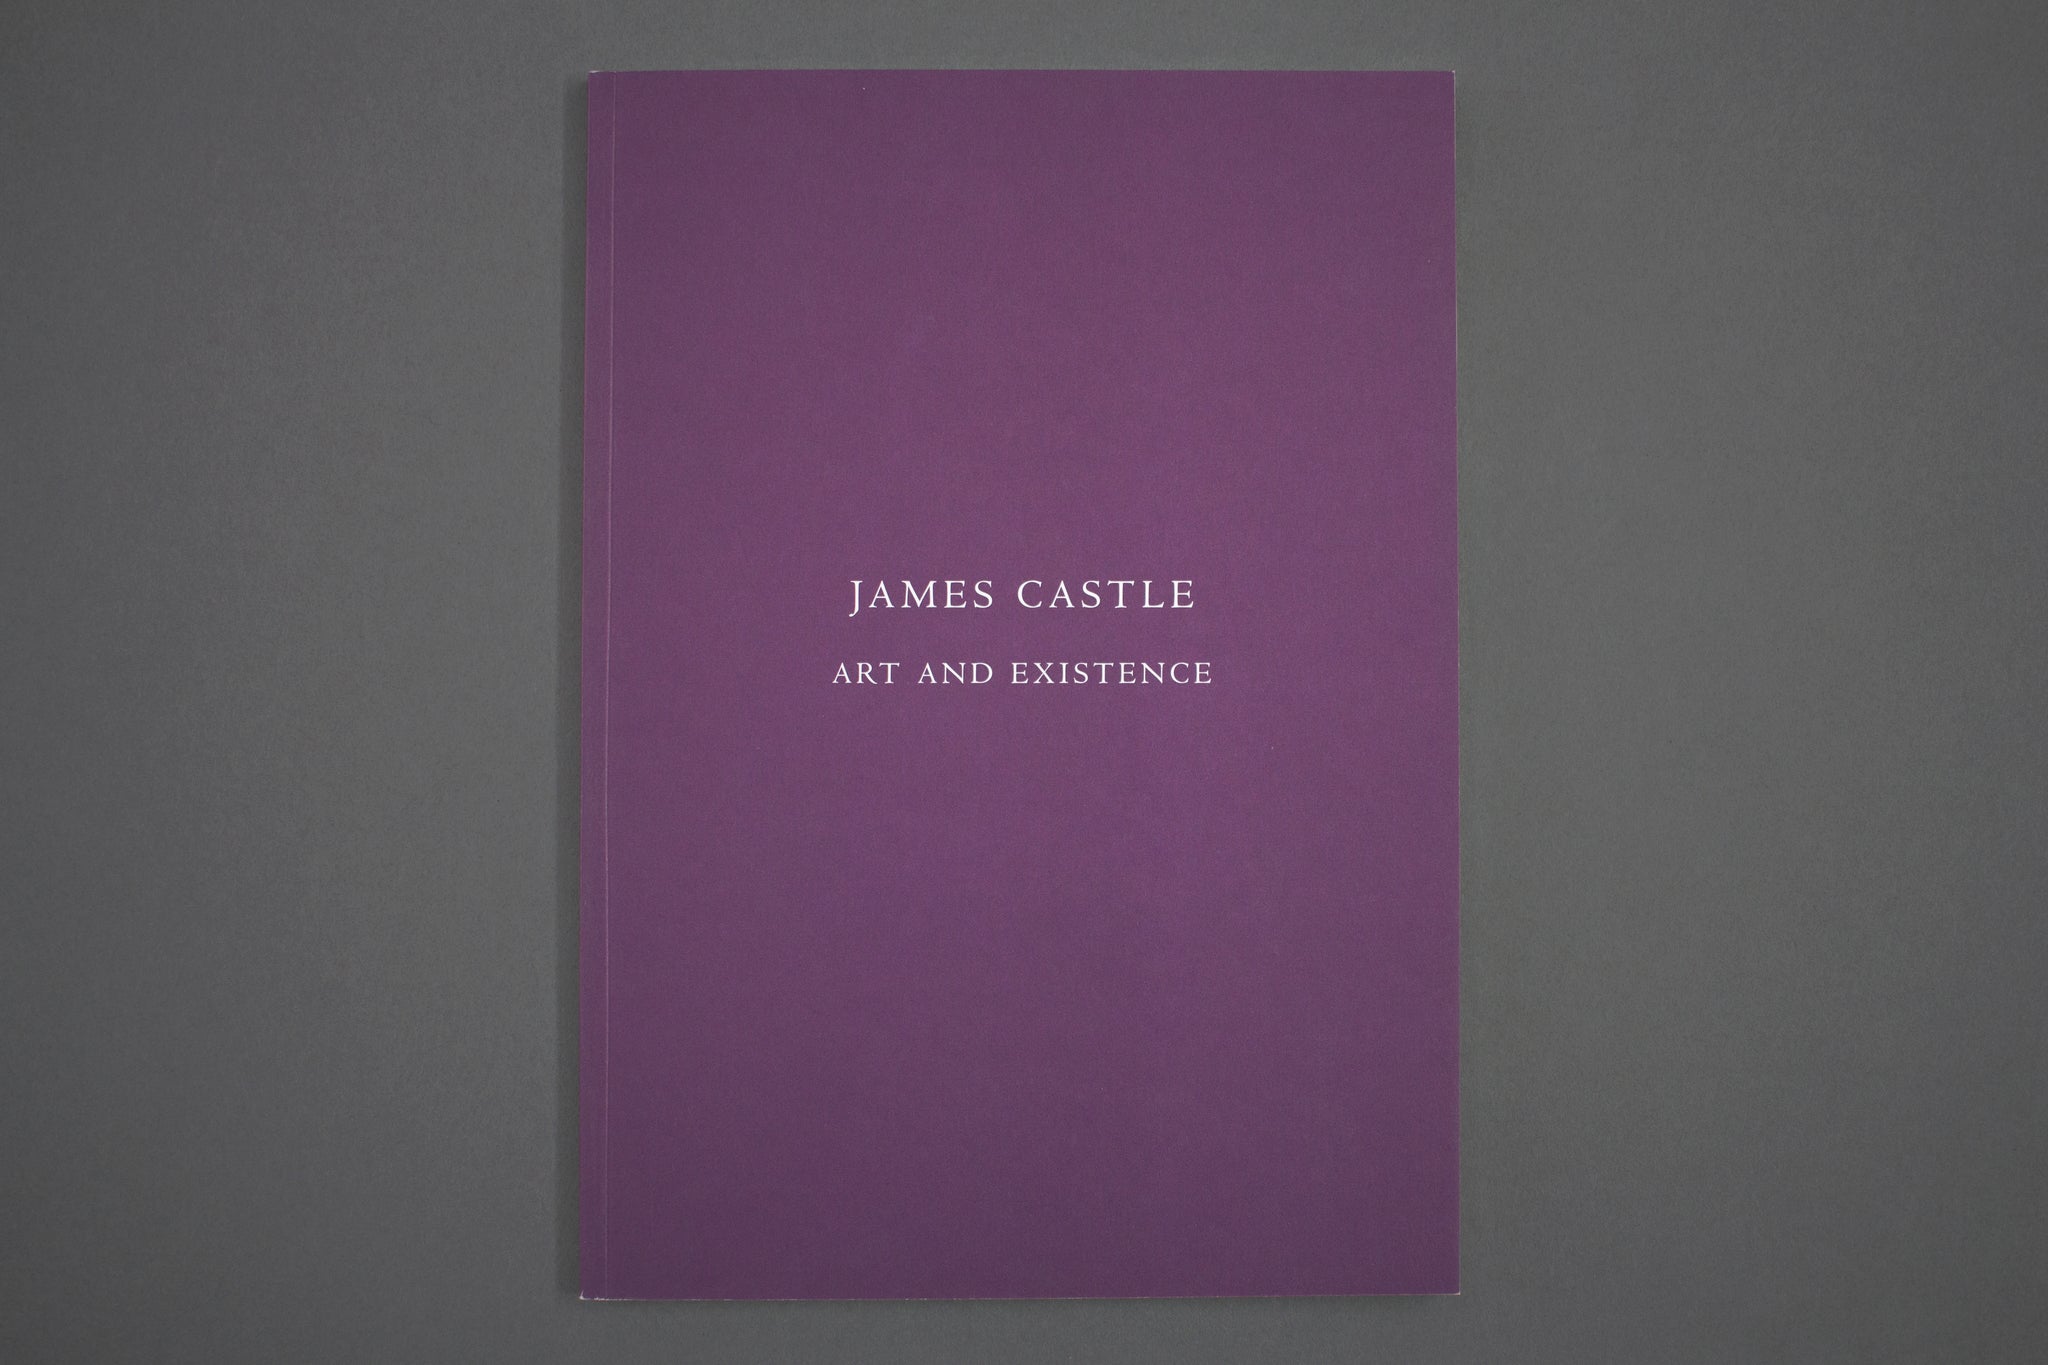 James Castle Art and Existence